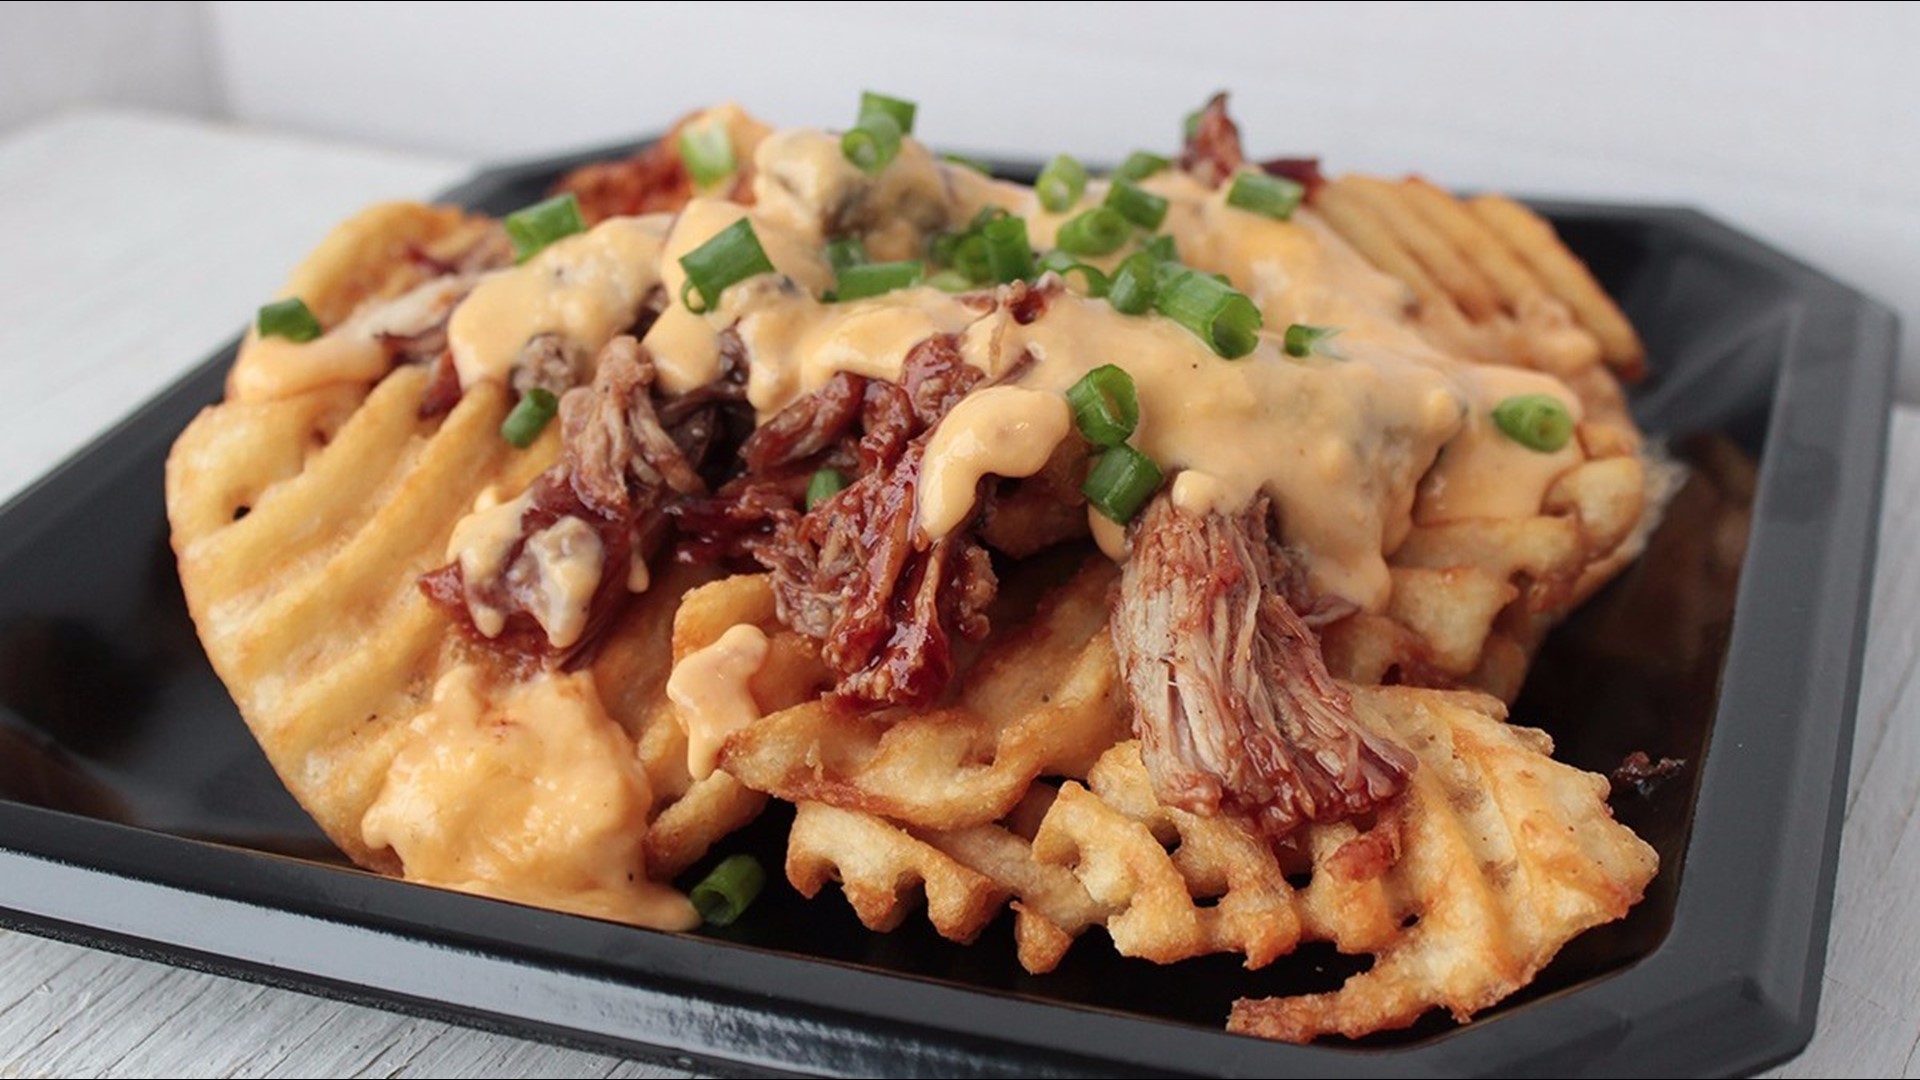 The West Michigan Whitecaps will bring back the fan-favorite to their menu for the 2020 season.